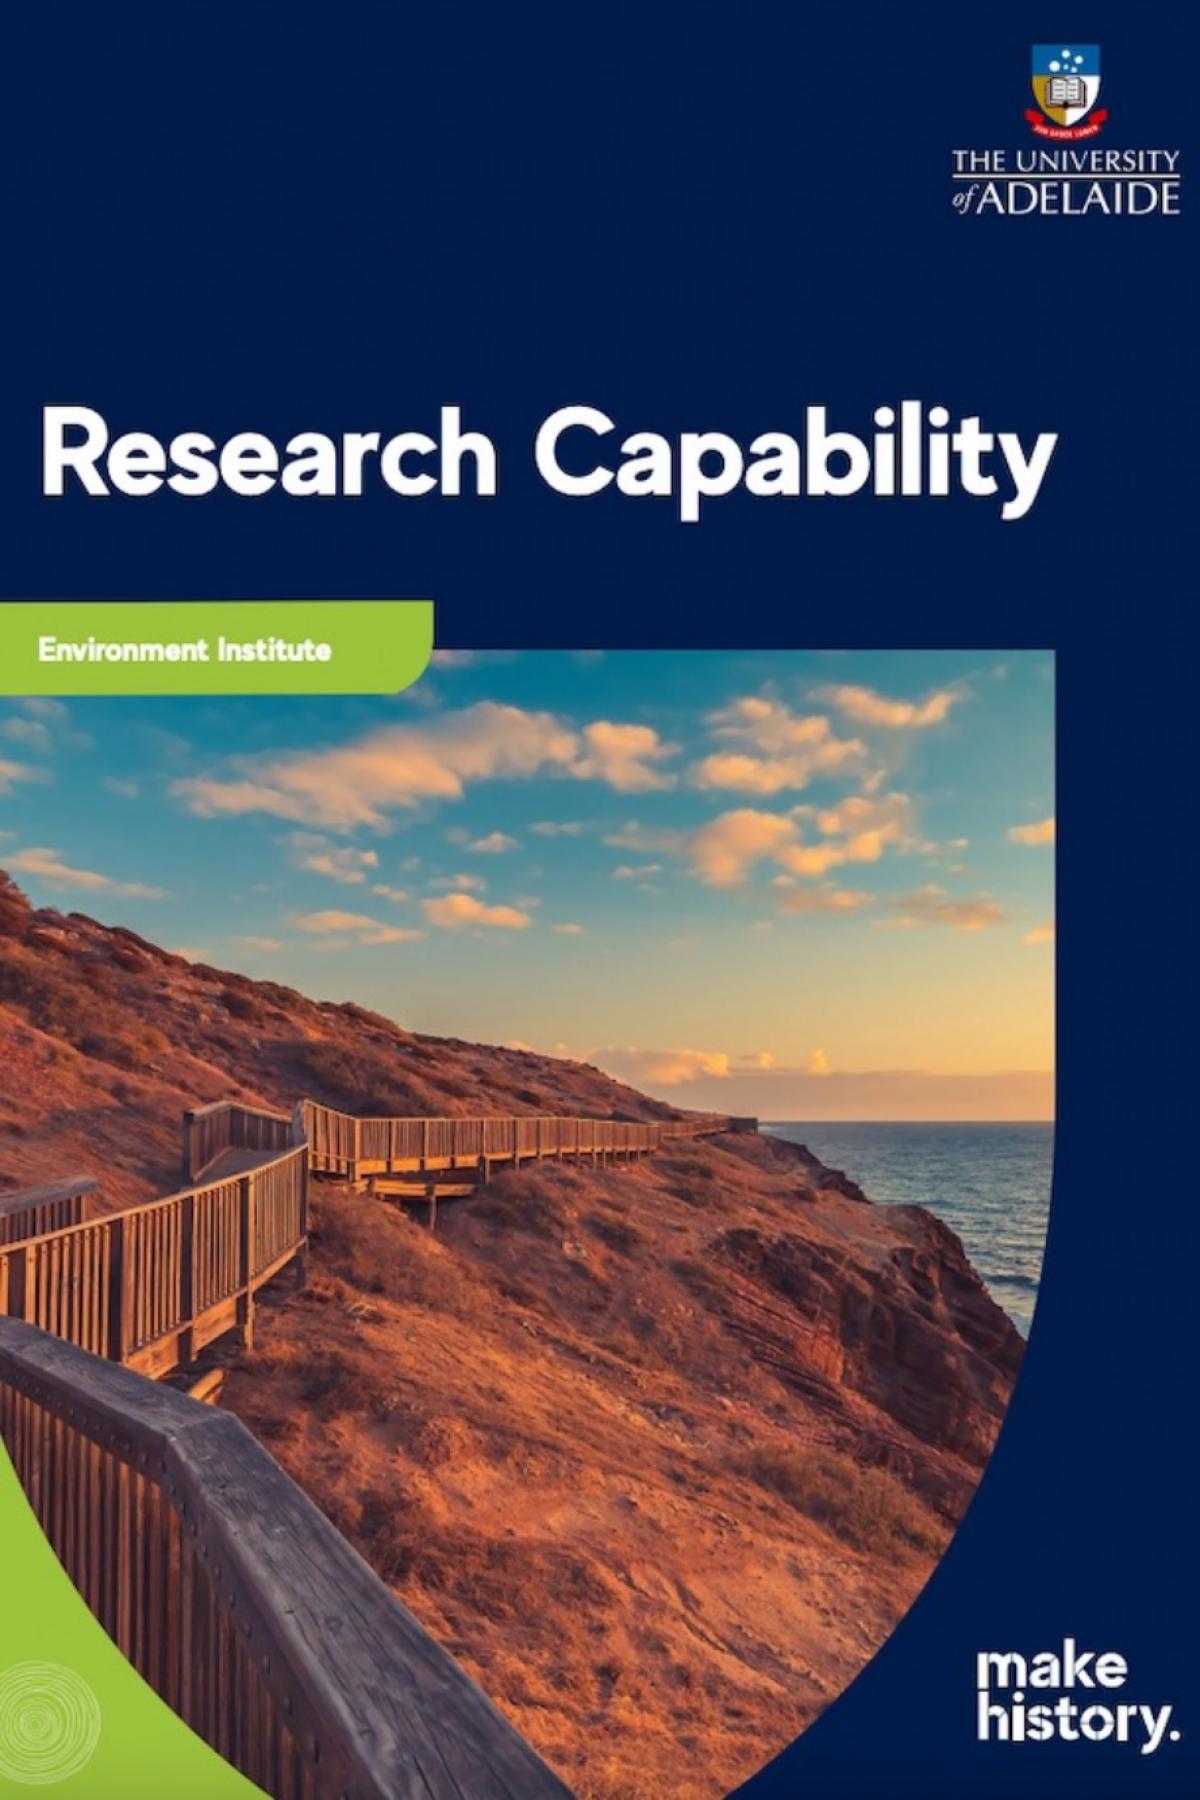 Research capability